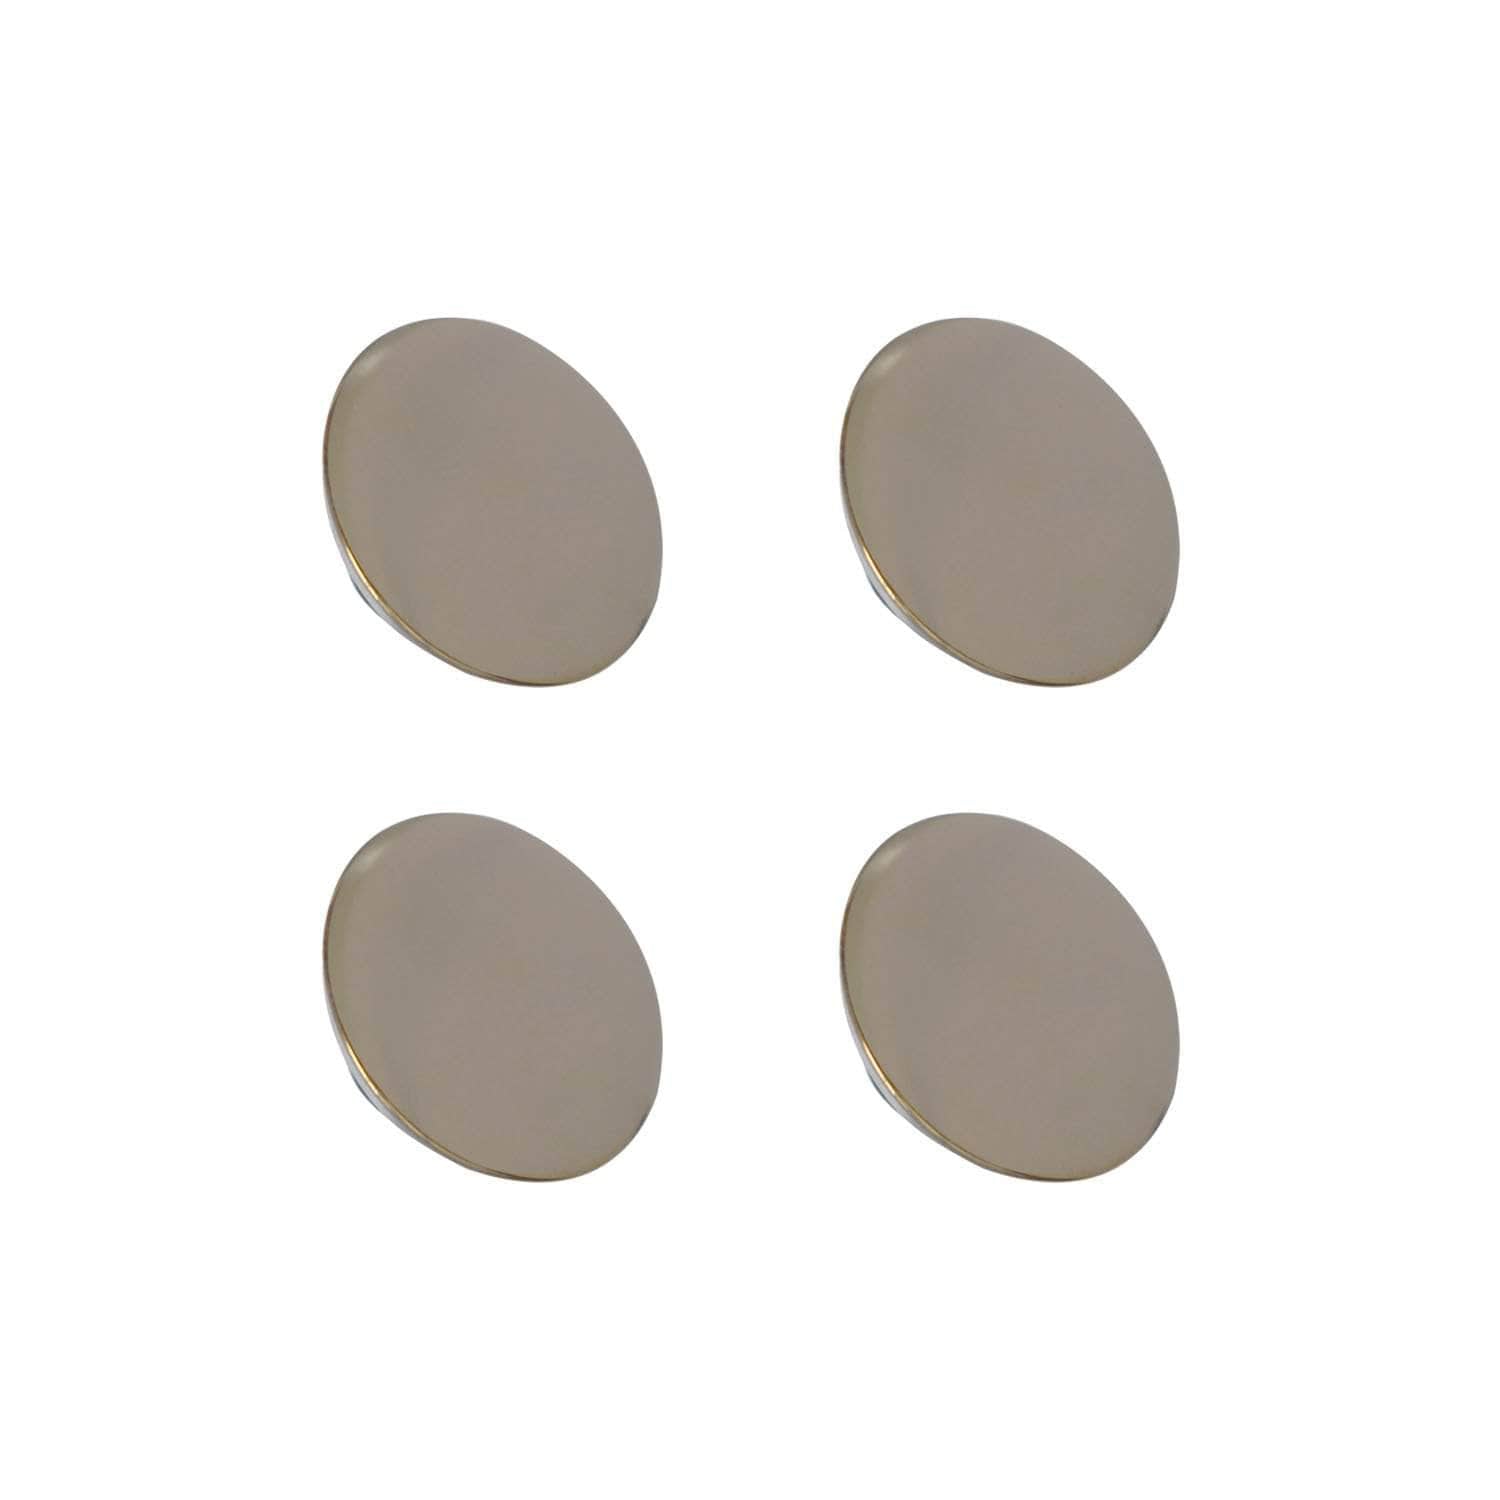 Chrome hob caps/buttons for use with Aga range cookers 'Deluxe' Aga range cooker. 20mm. Set of 4